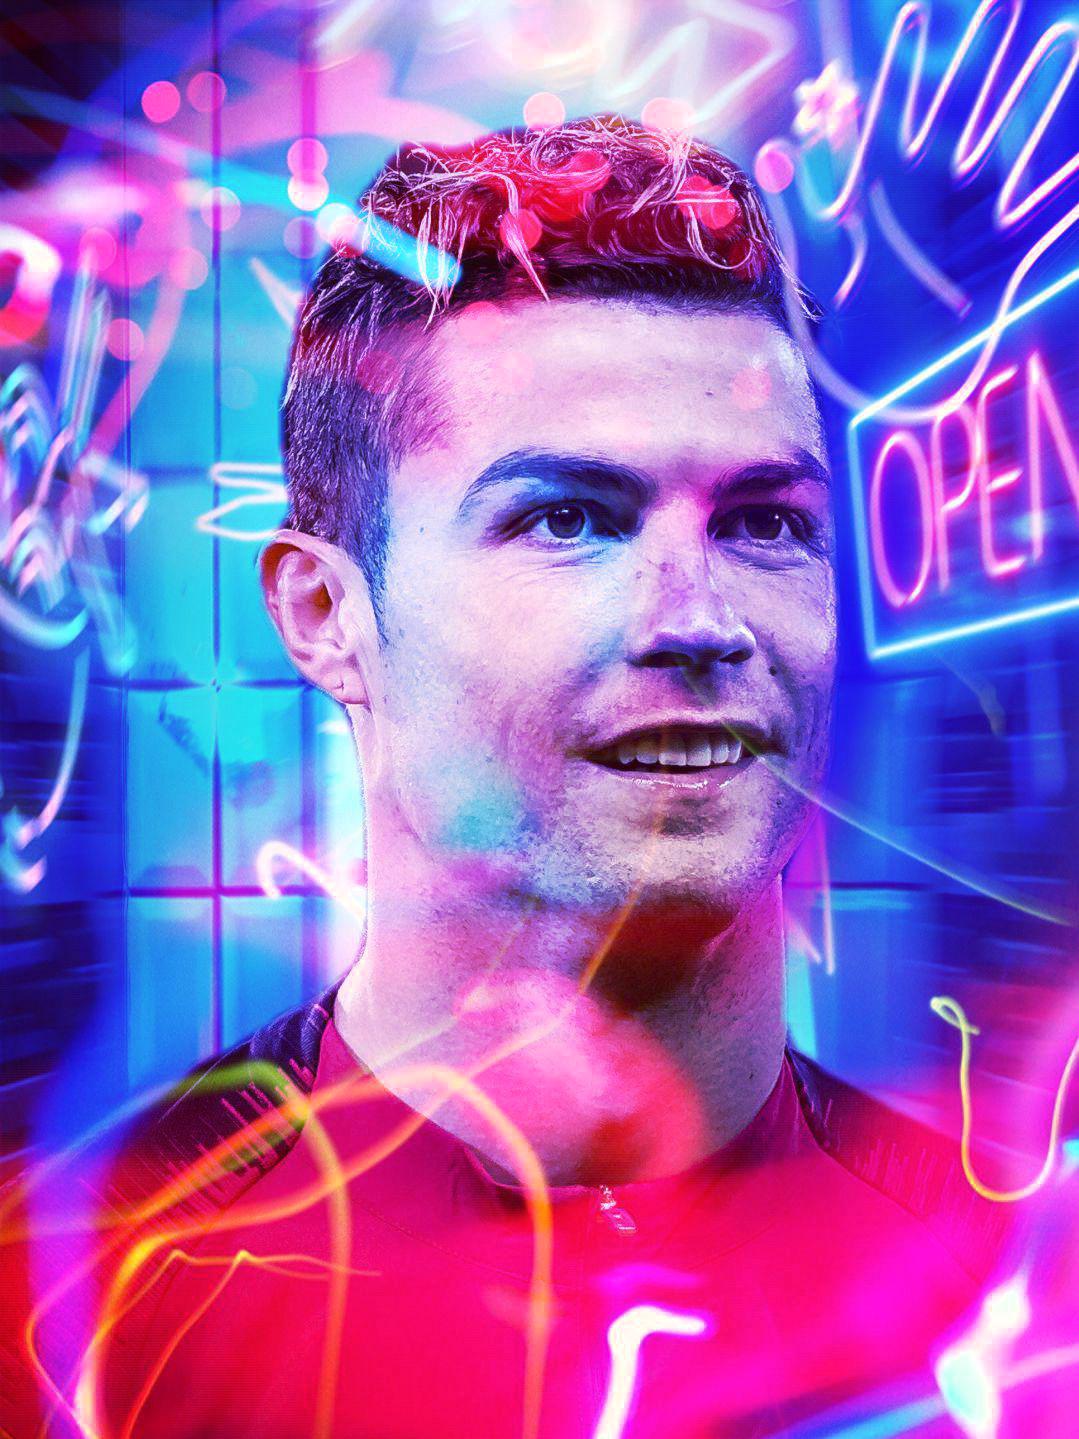 Xxx C R 7 - Cristiano Ronaldo - Christmas Giveaway! - Celeb ART - Beautiful Artworks of  Celebrities, Footballers, Politicians and Famous People in World | OpenSea